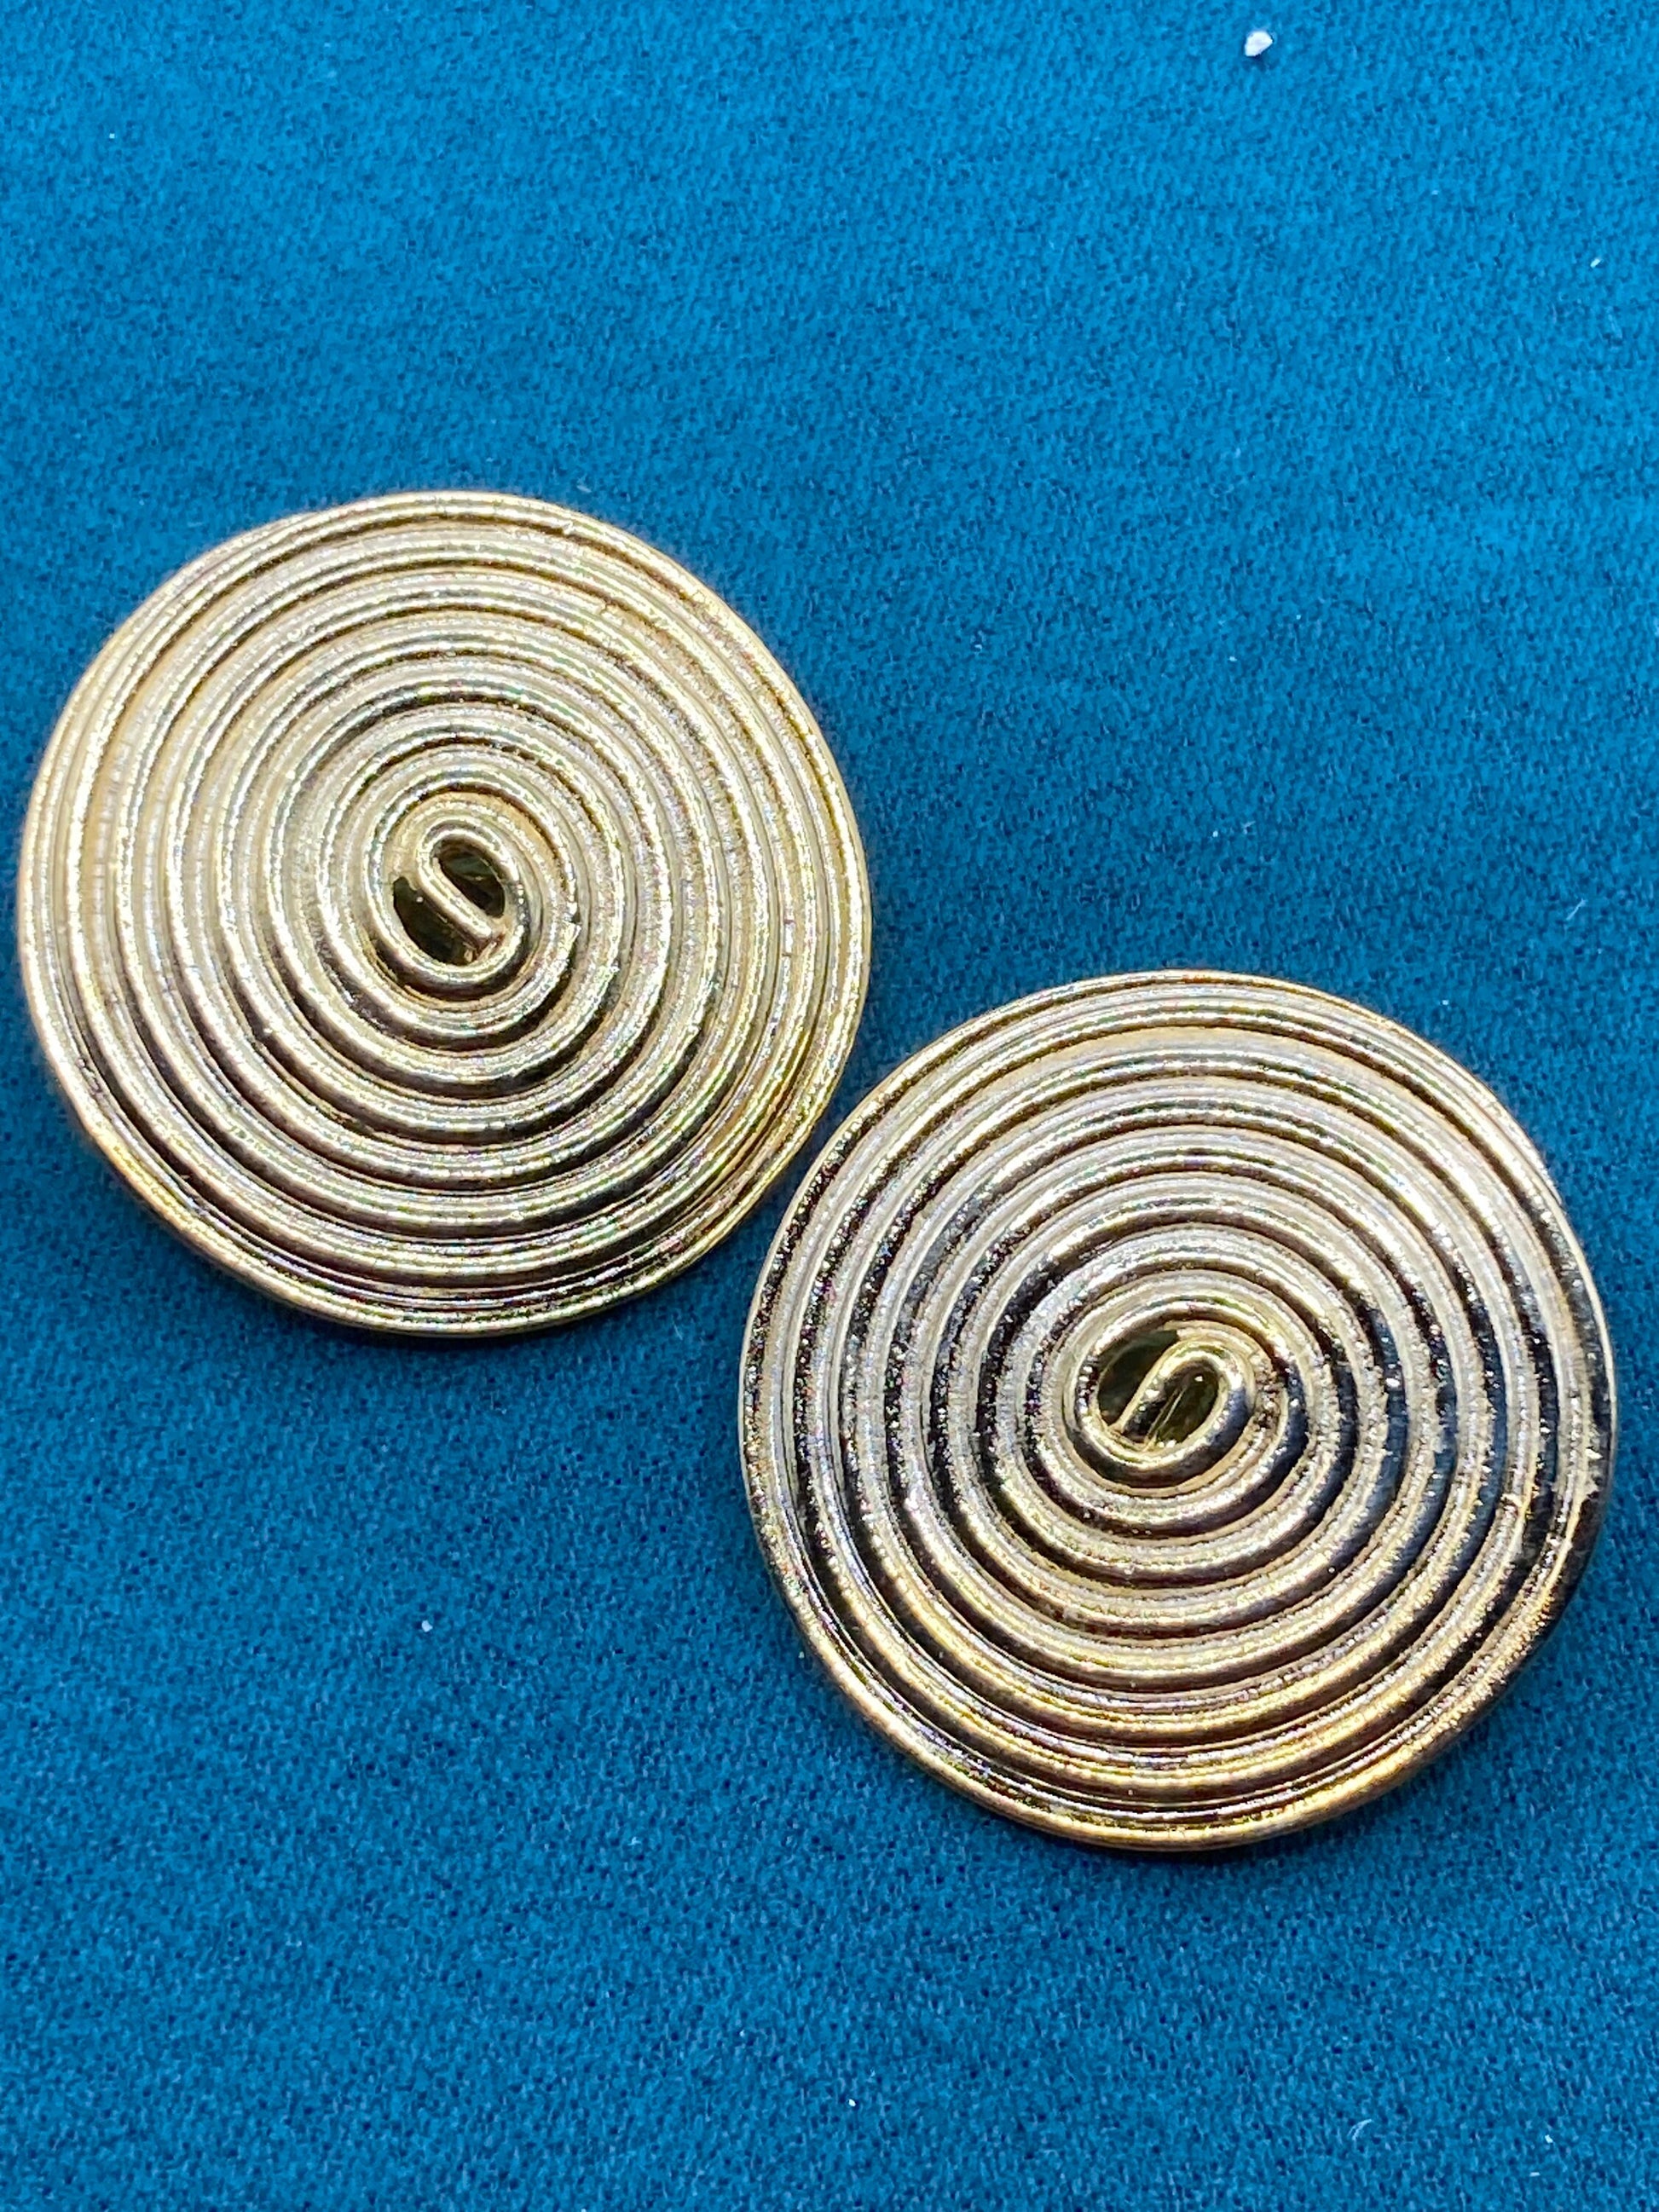 True vintage pristine oversized gold plated Etruscan 4.75cm round disc button earrings genuine period old shop stock